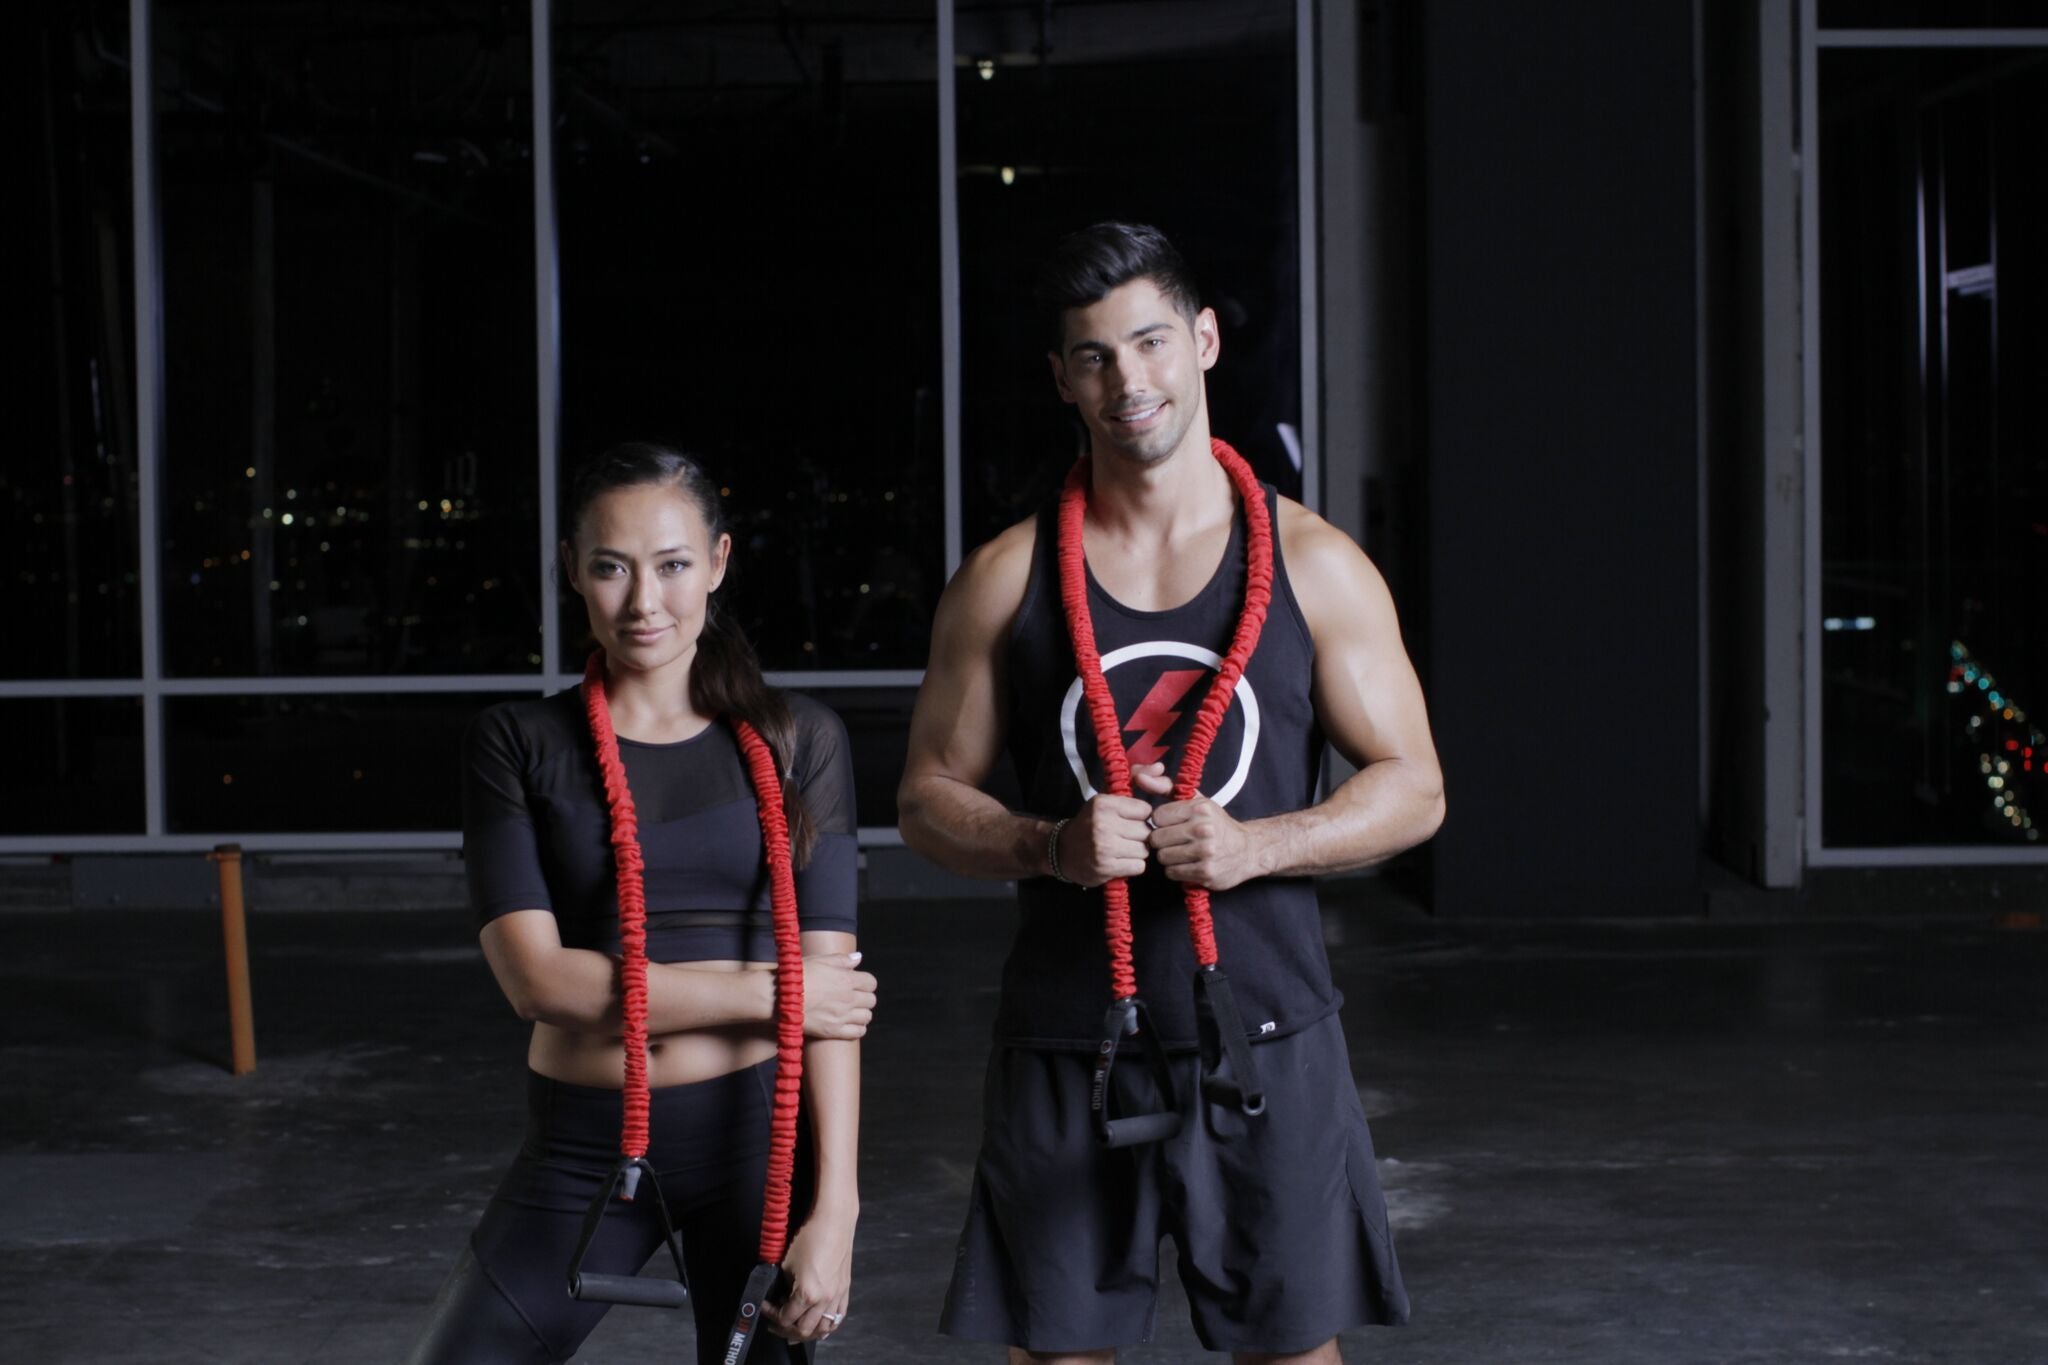 Resistance Band Training: What Are the Benefits?